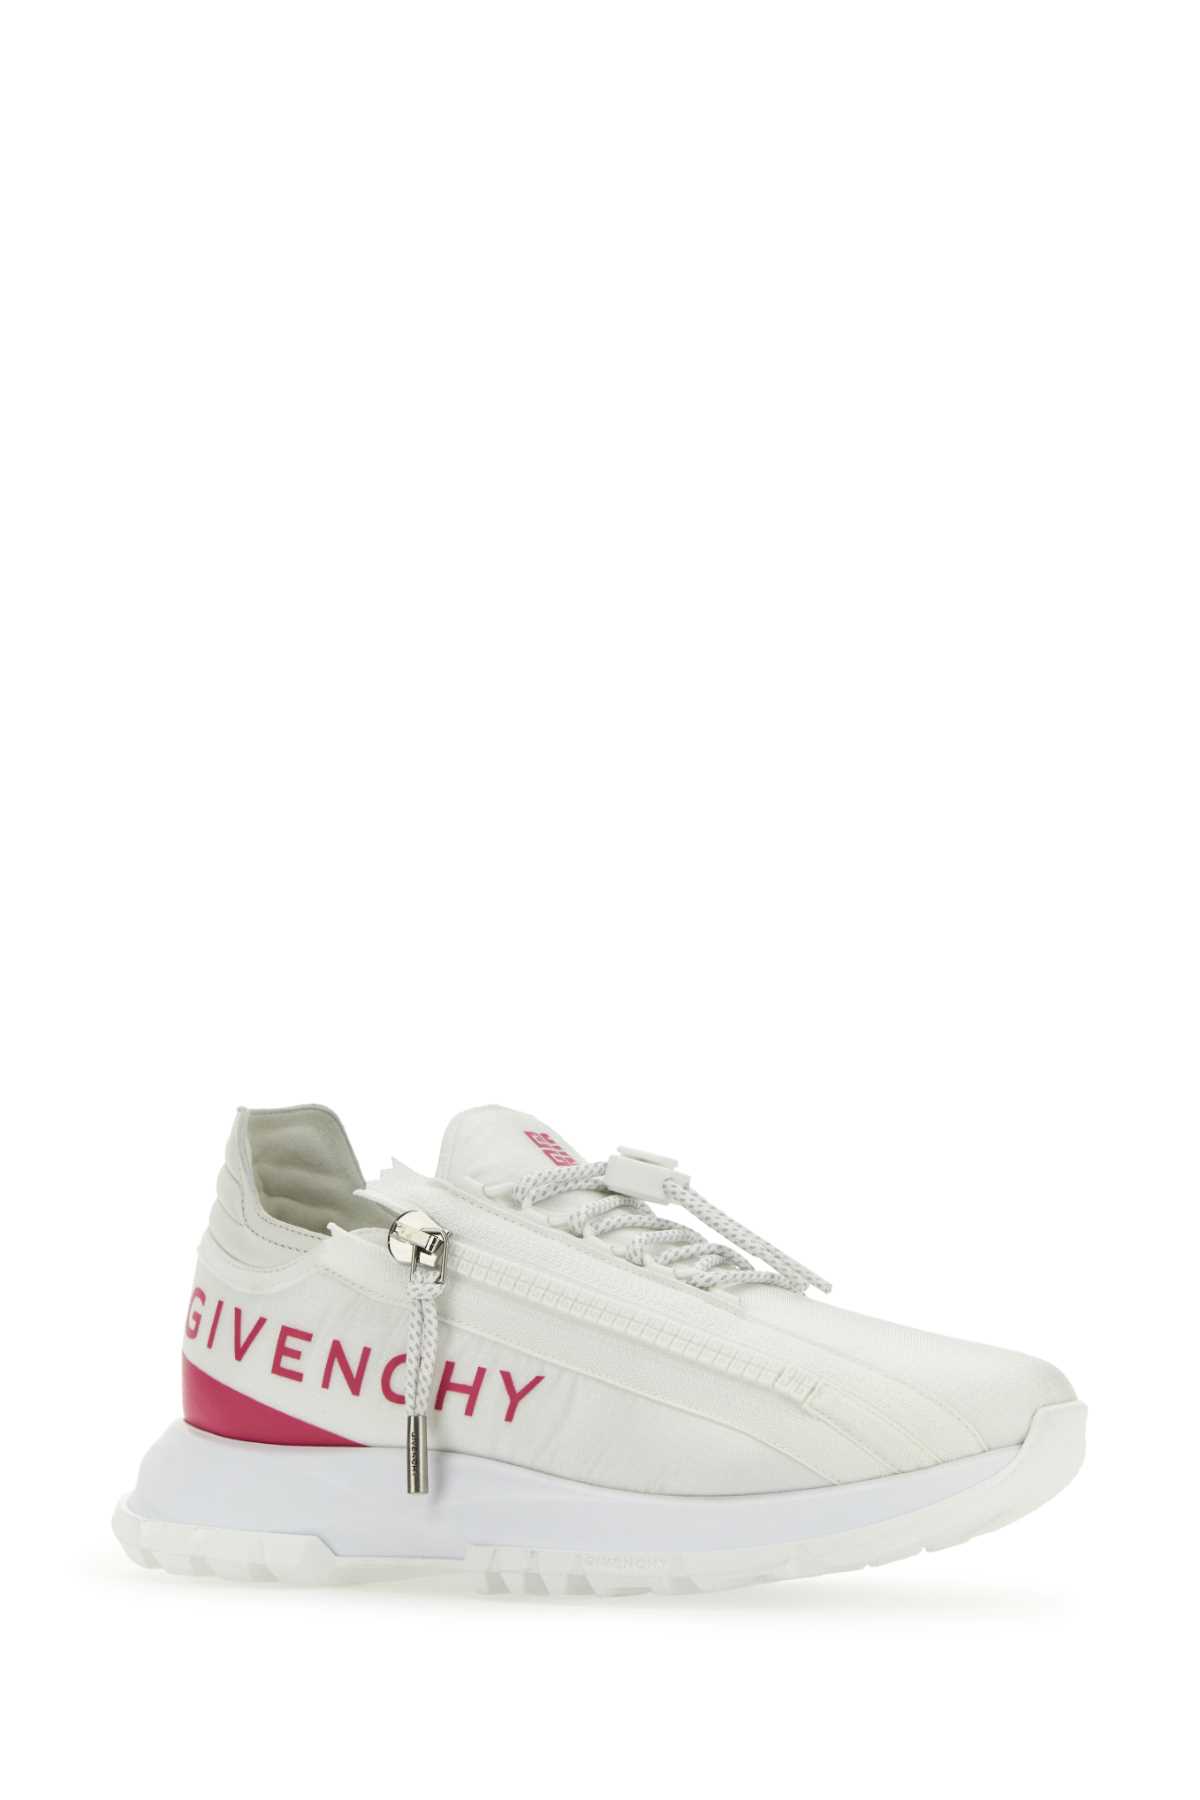 Givenchy White Fabric And Leather Spectre Sneakers In Whitefuchsia